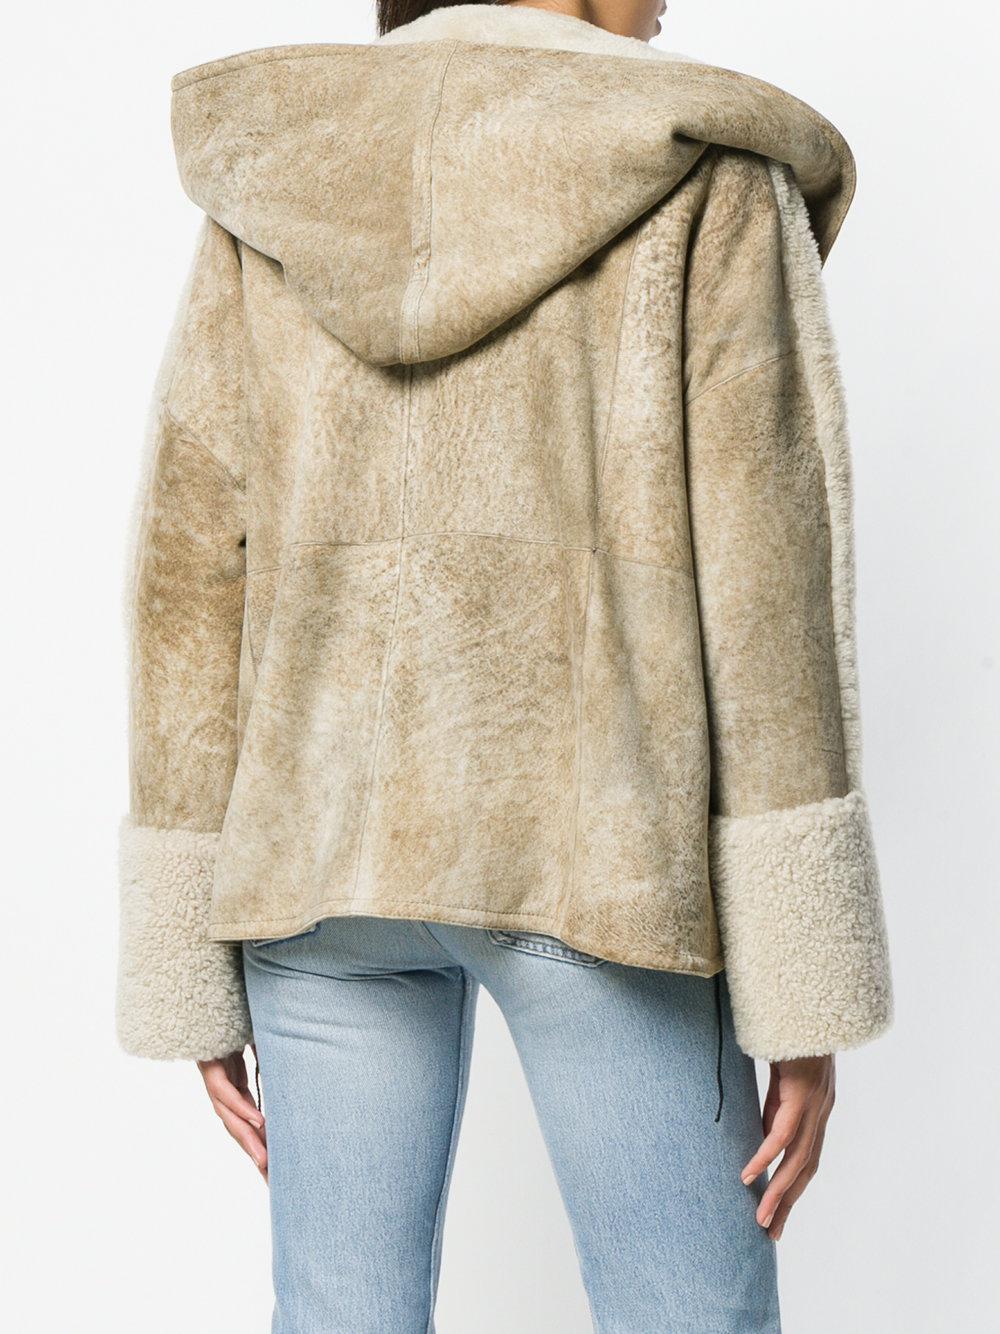 Army by Yves Salomon Fur Hooded Jacket in Natural - Lyst